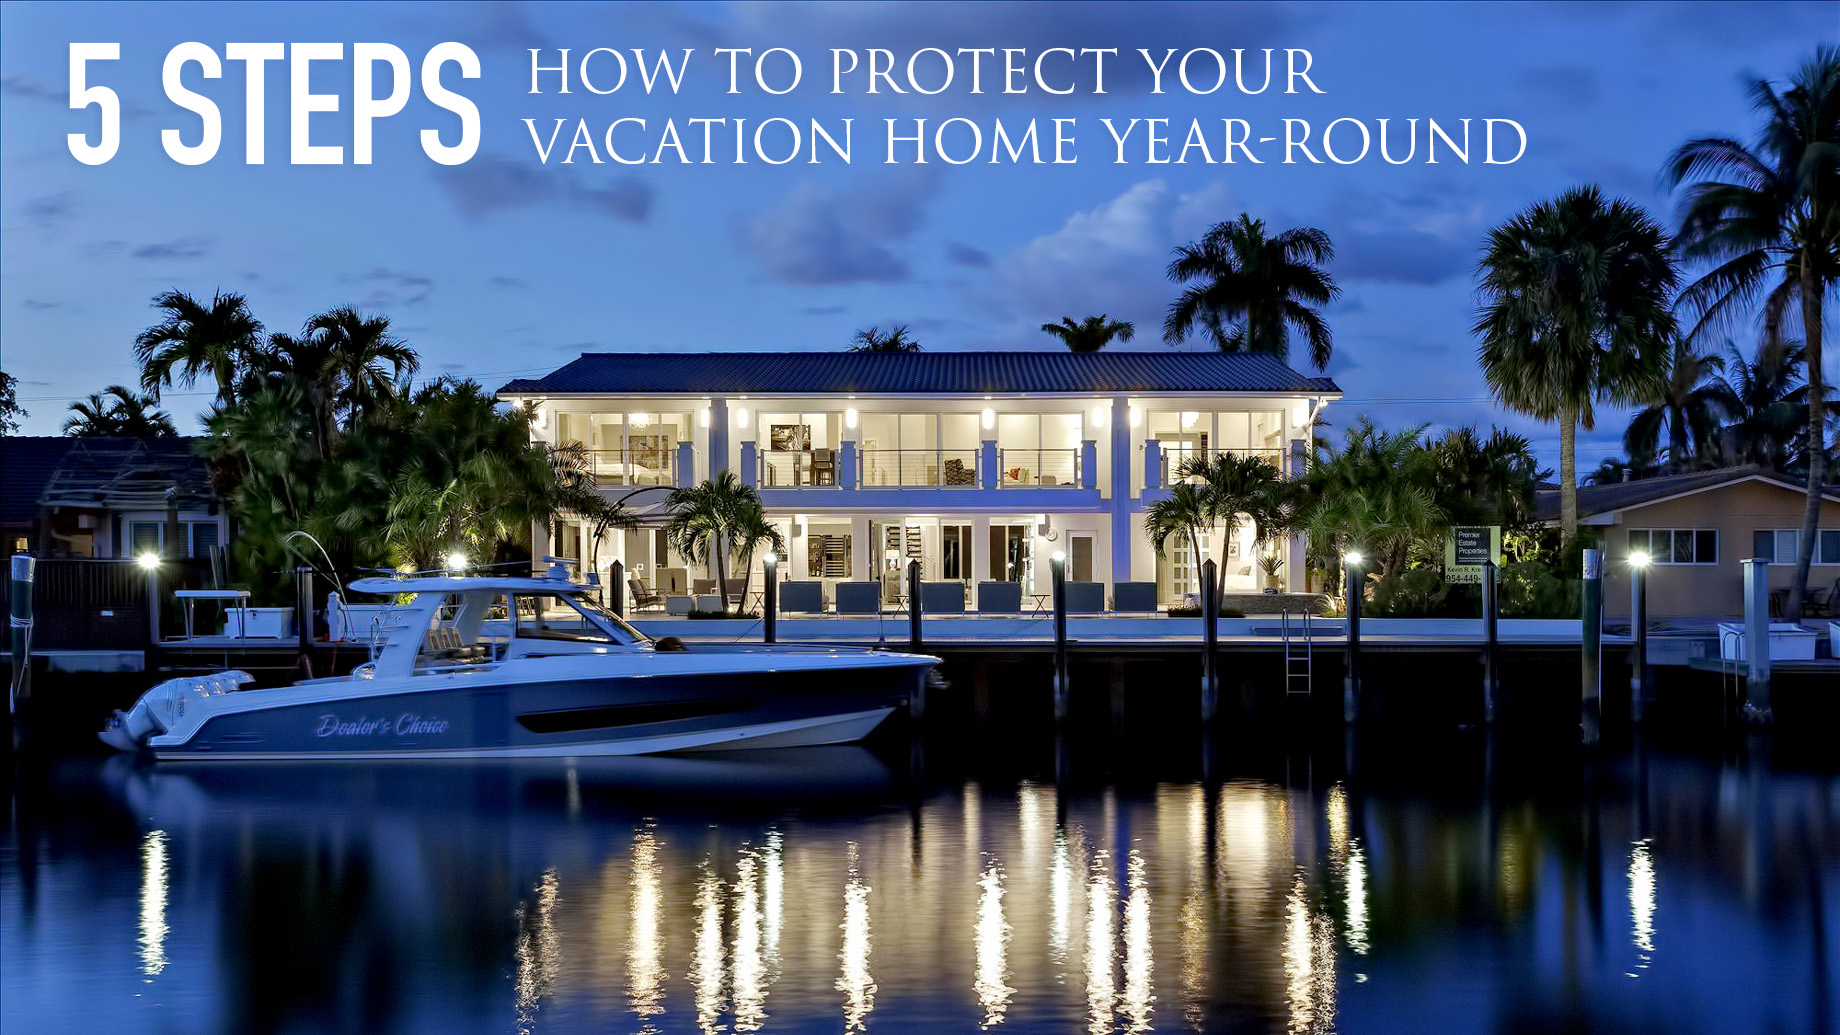 5 Steps to Protect Your Vacation Home Year-Round